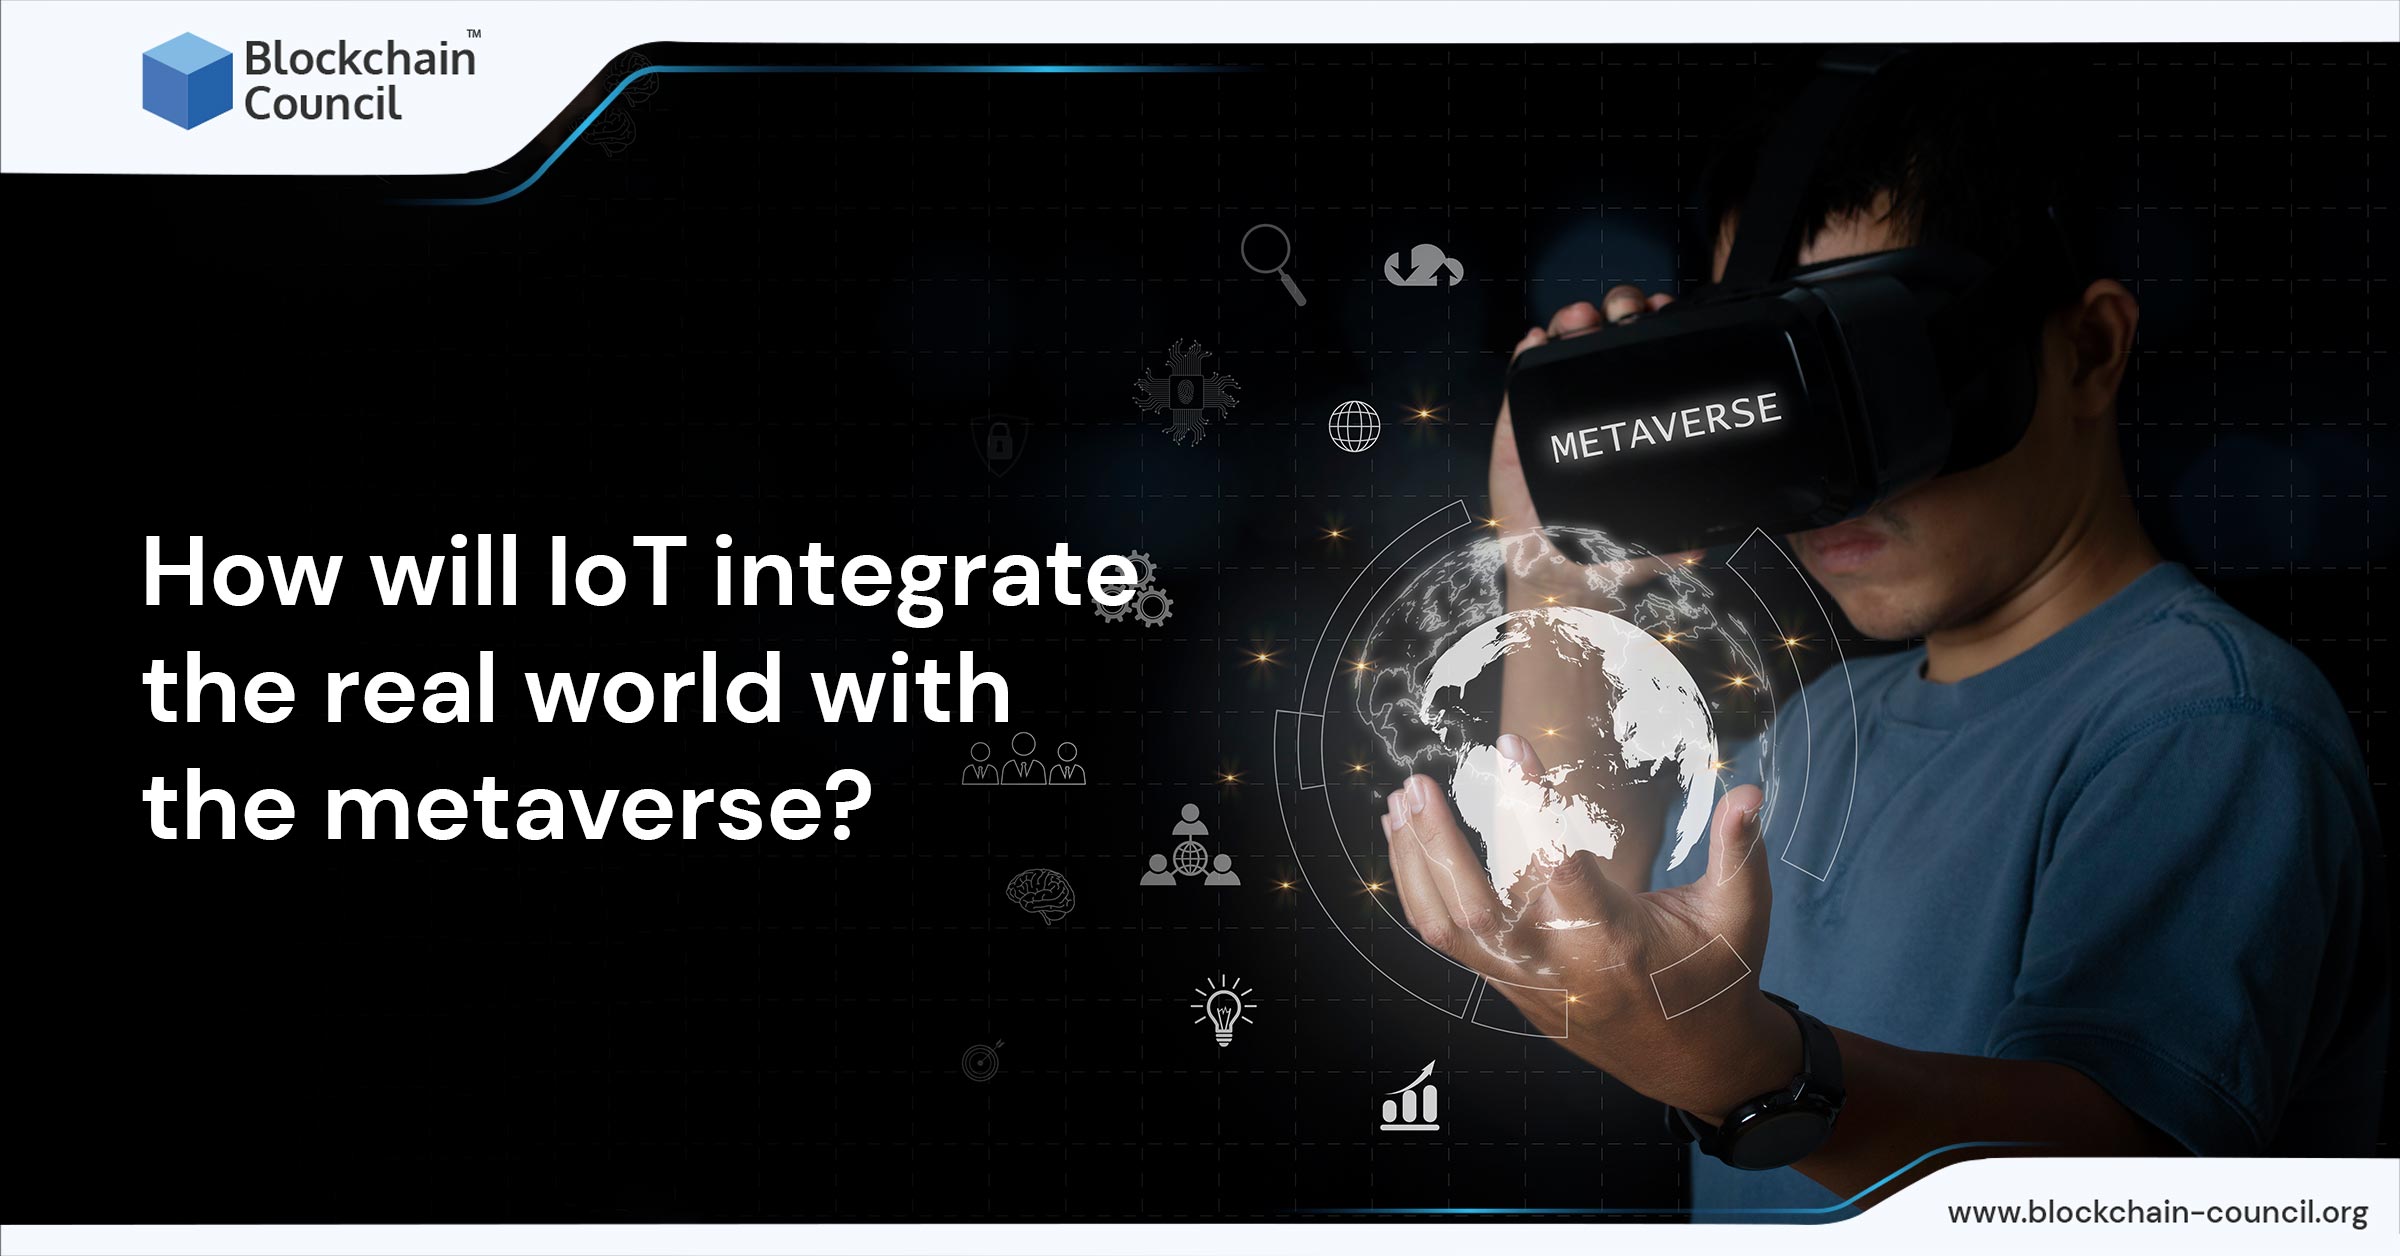 How will IoT integrate the real world with the metaverse?